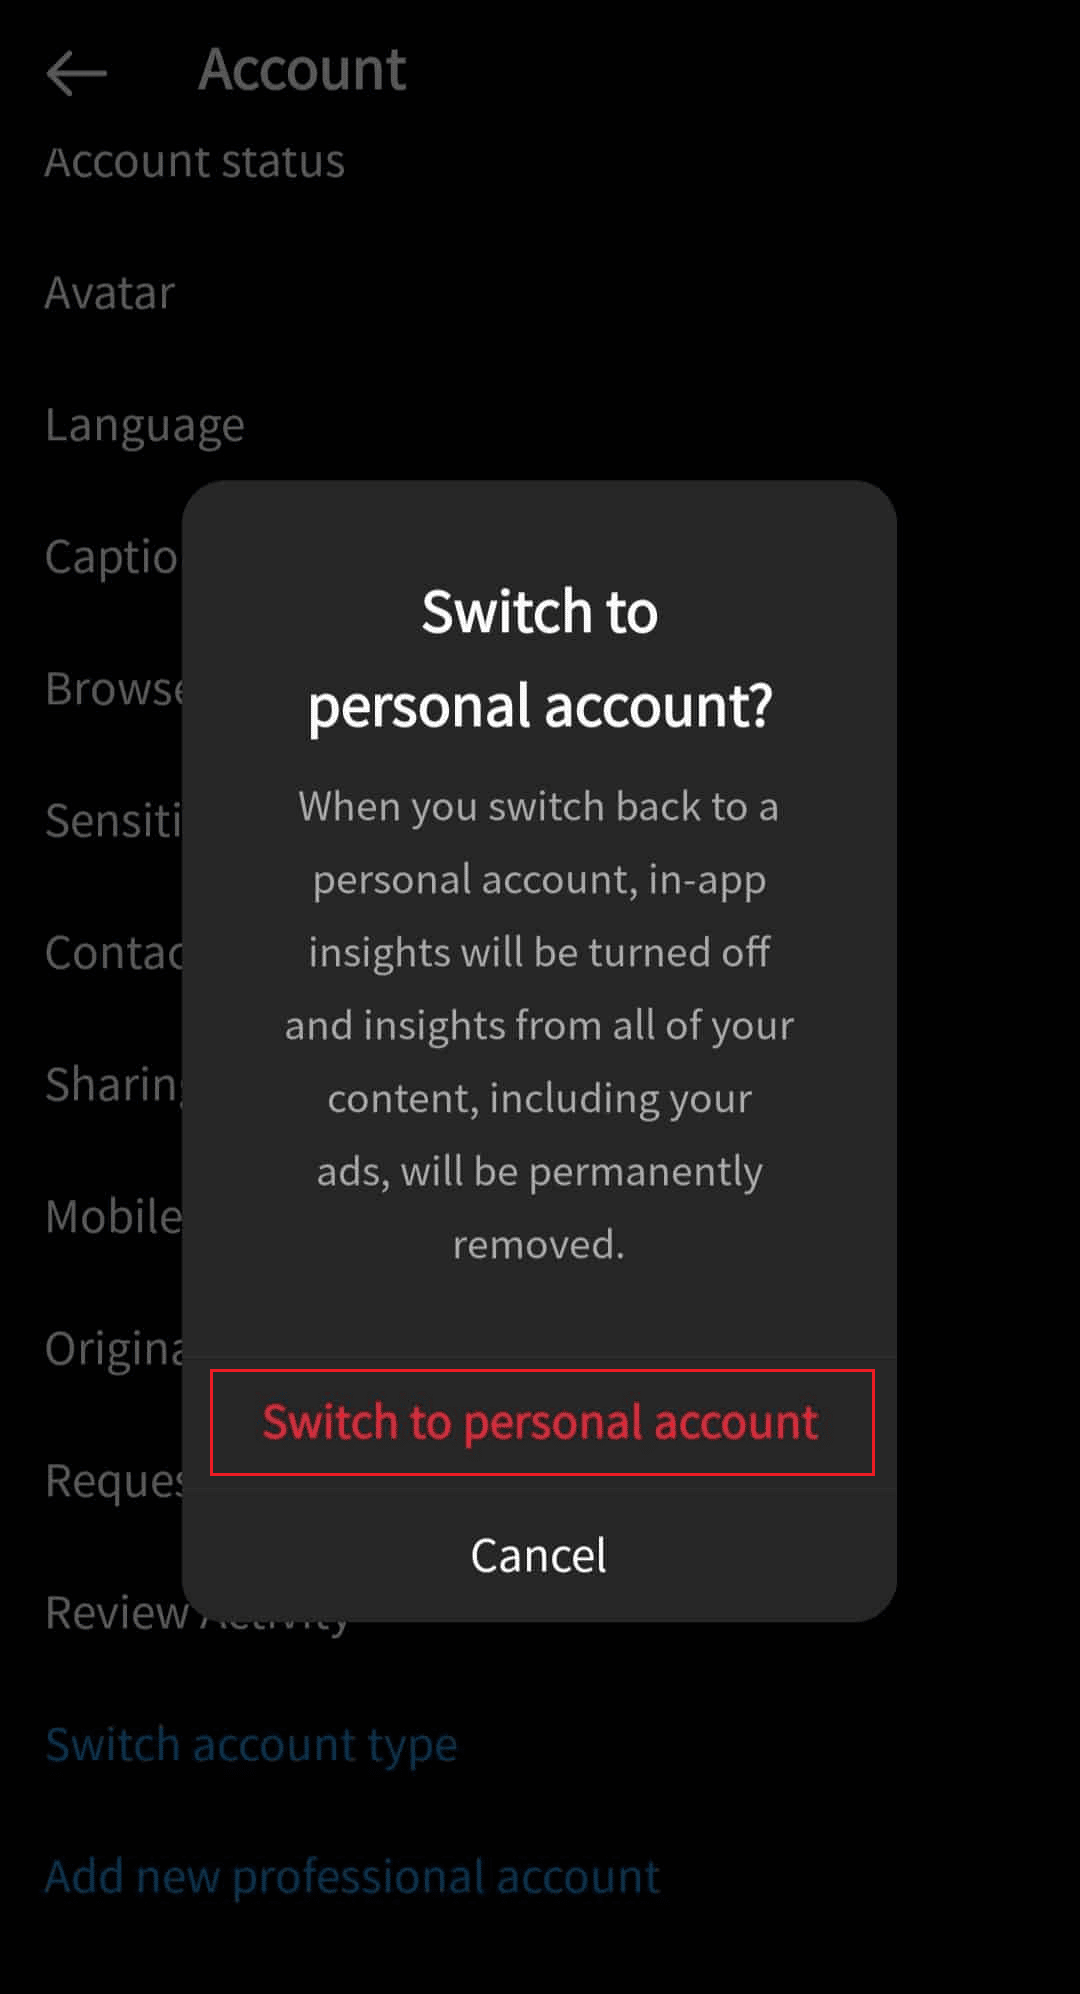 From the confirmation popup, tap on Switch to personal account